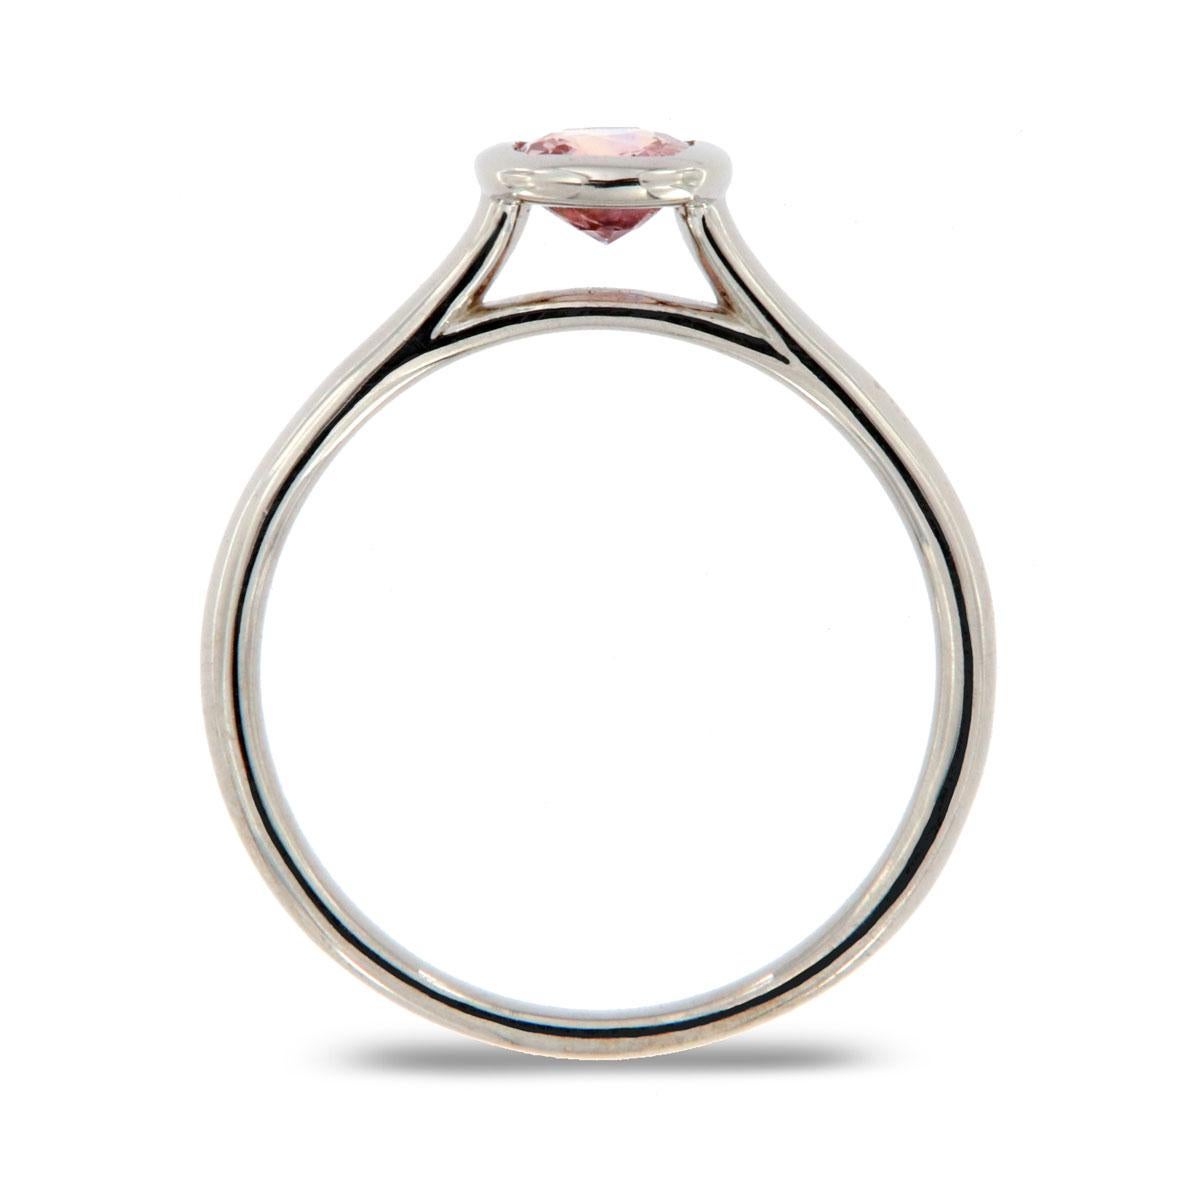 This Solitaire ring features 0.64-carat square cushion shape Peach Natural Sapphire in a bezel setting. Unheated

Product details: 

Center Gemstone Type: PEACH SAPPHIRE
Center Gemstone Carat Weight: 0.66
Center Gemstone Diameter: 5x5
Center